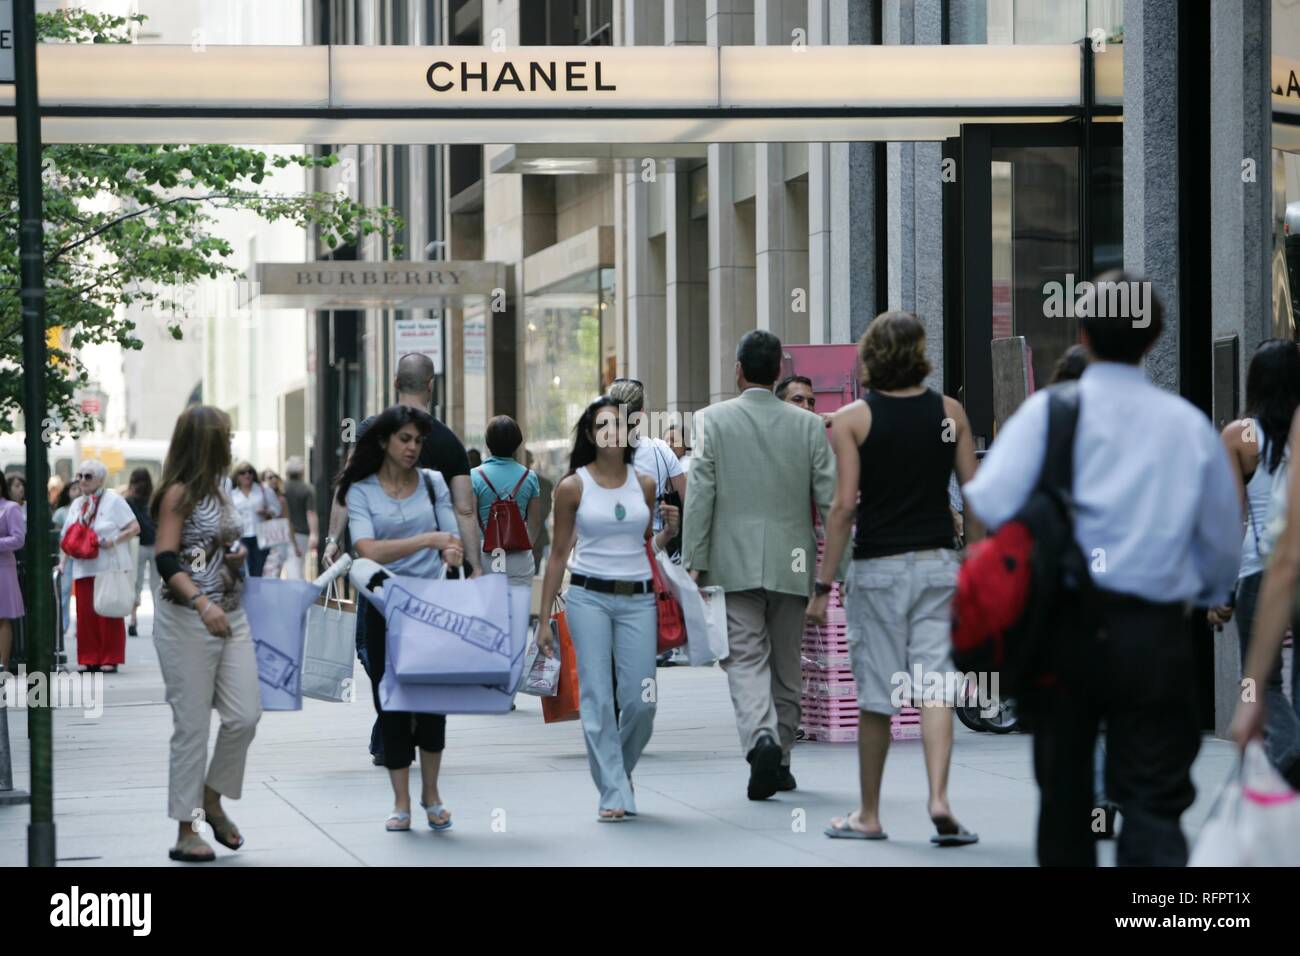 USA, United States of America, New York City: Midtown Manhattan, 5th Avenue/57th Street . Chanel boutique. Stock Photo